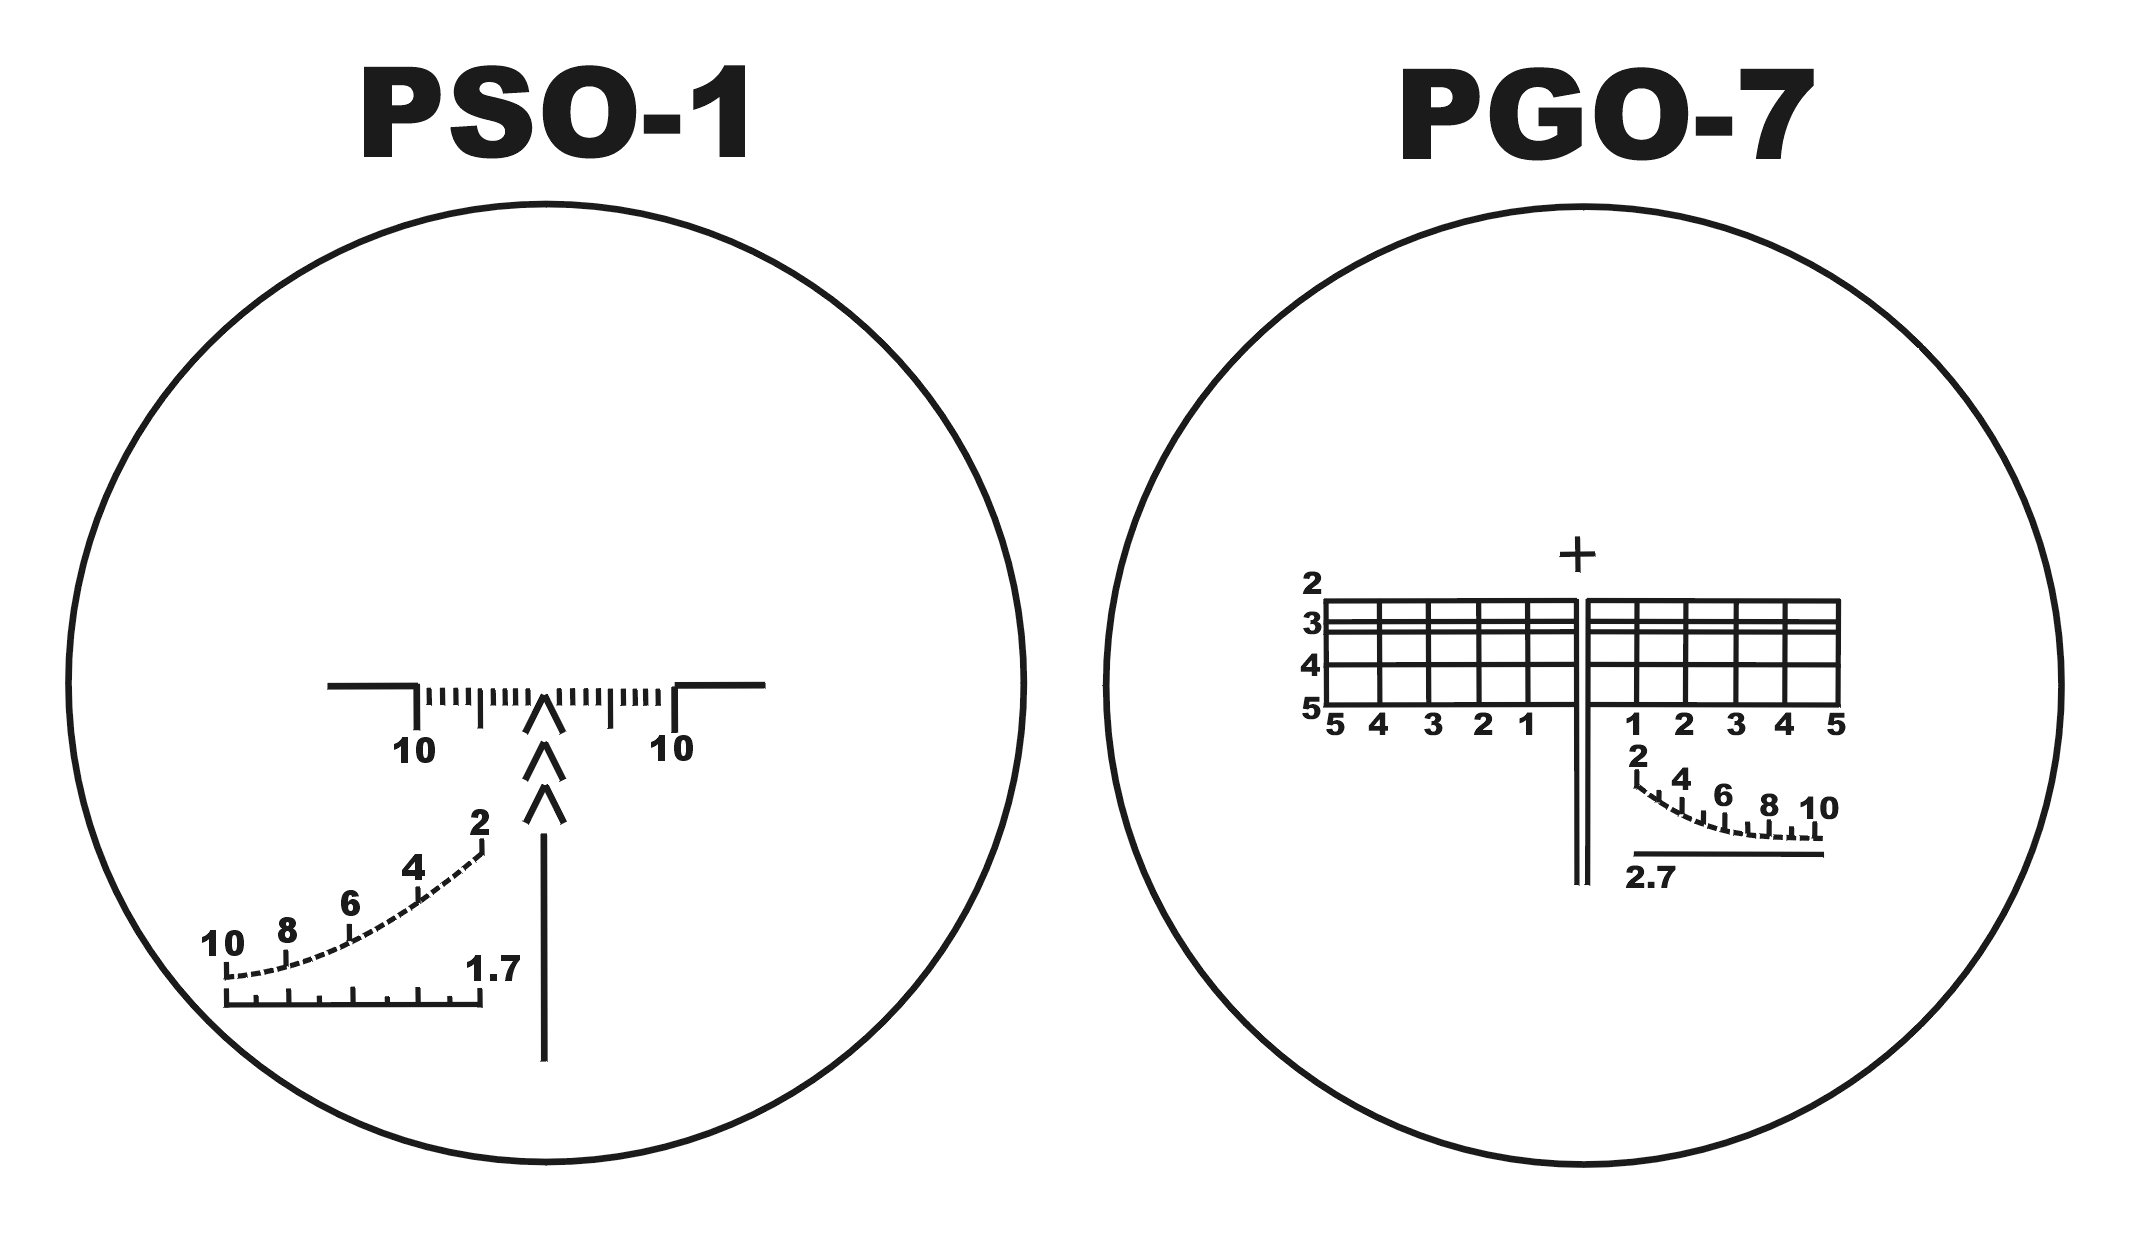 PSO-1_and_PGO-7_Reticle_Scheme.png